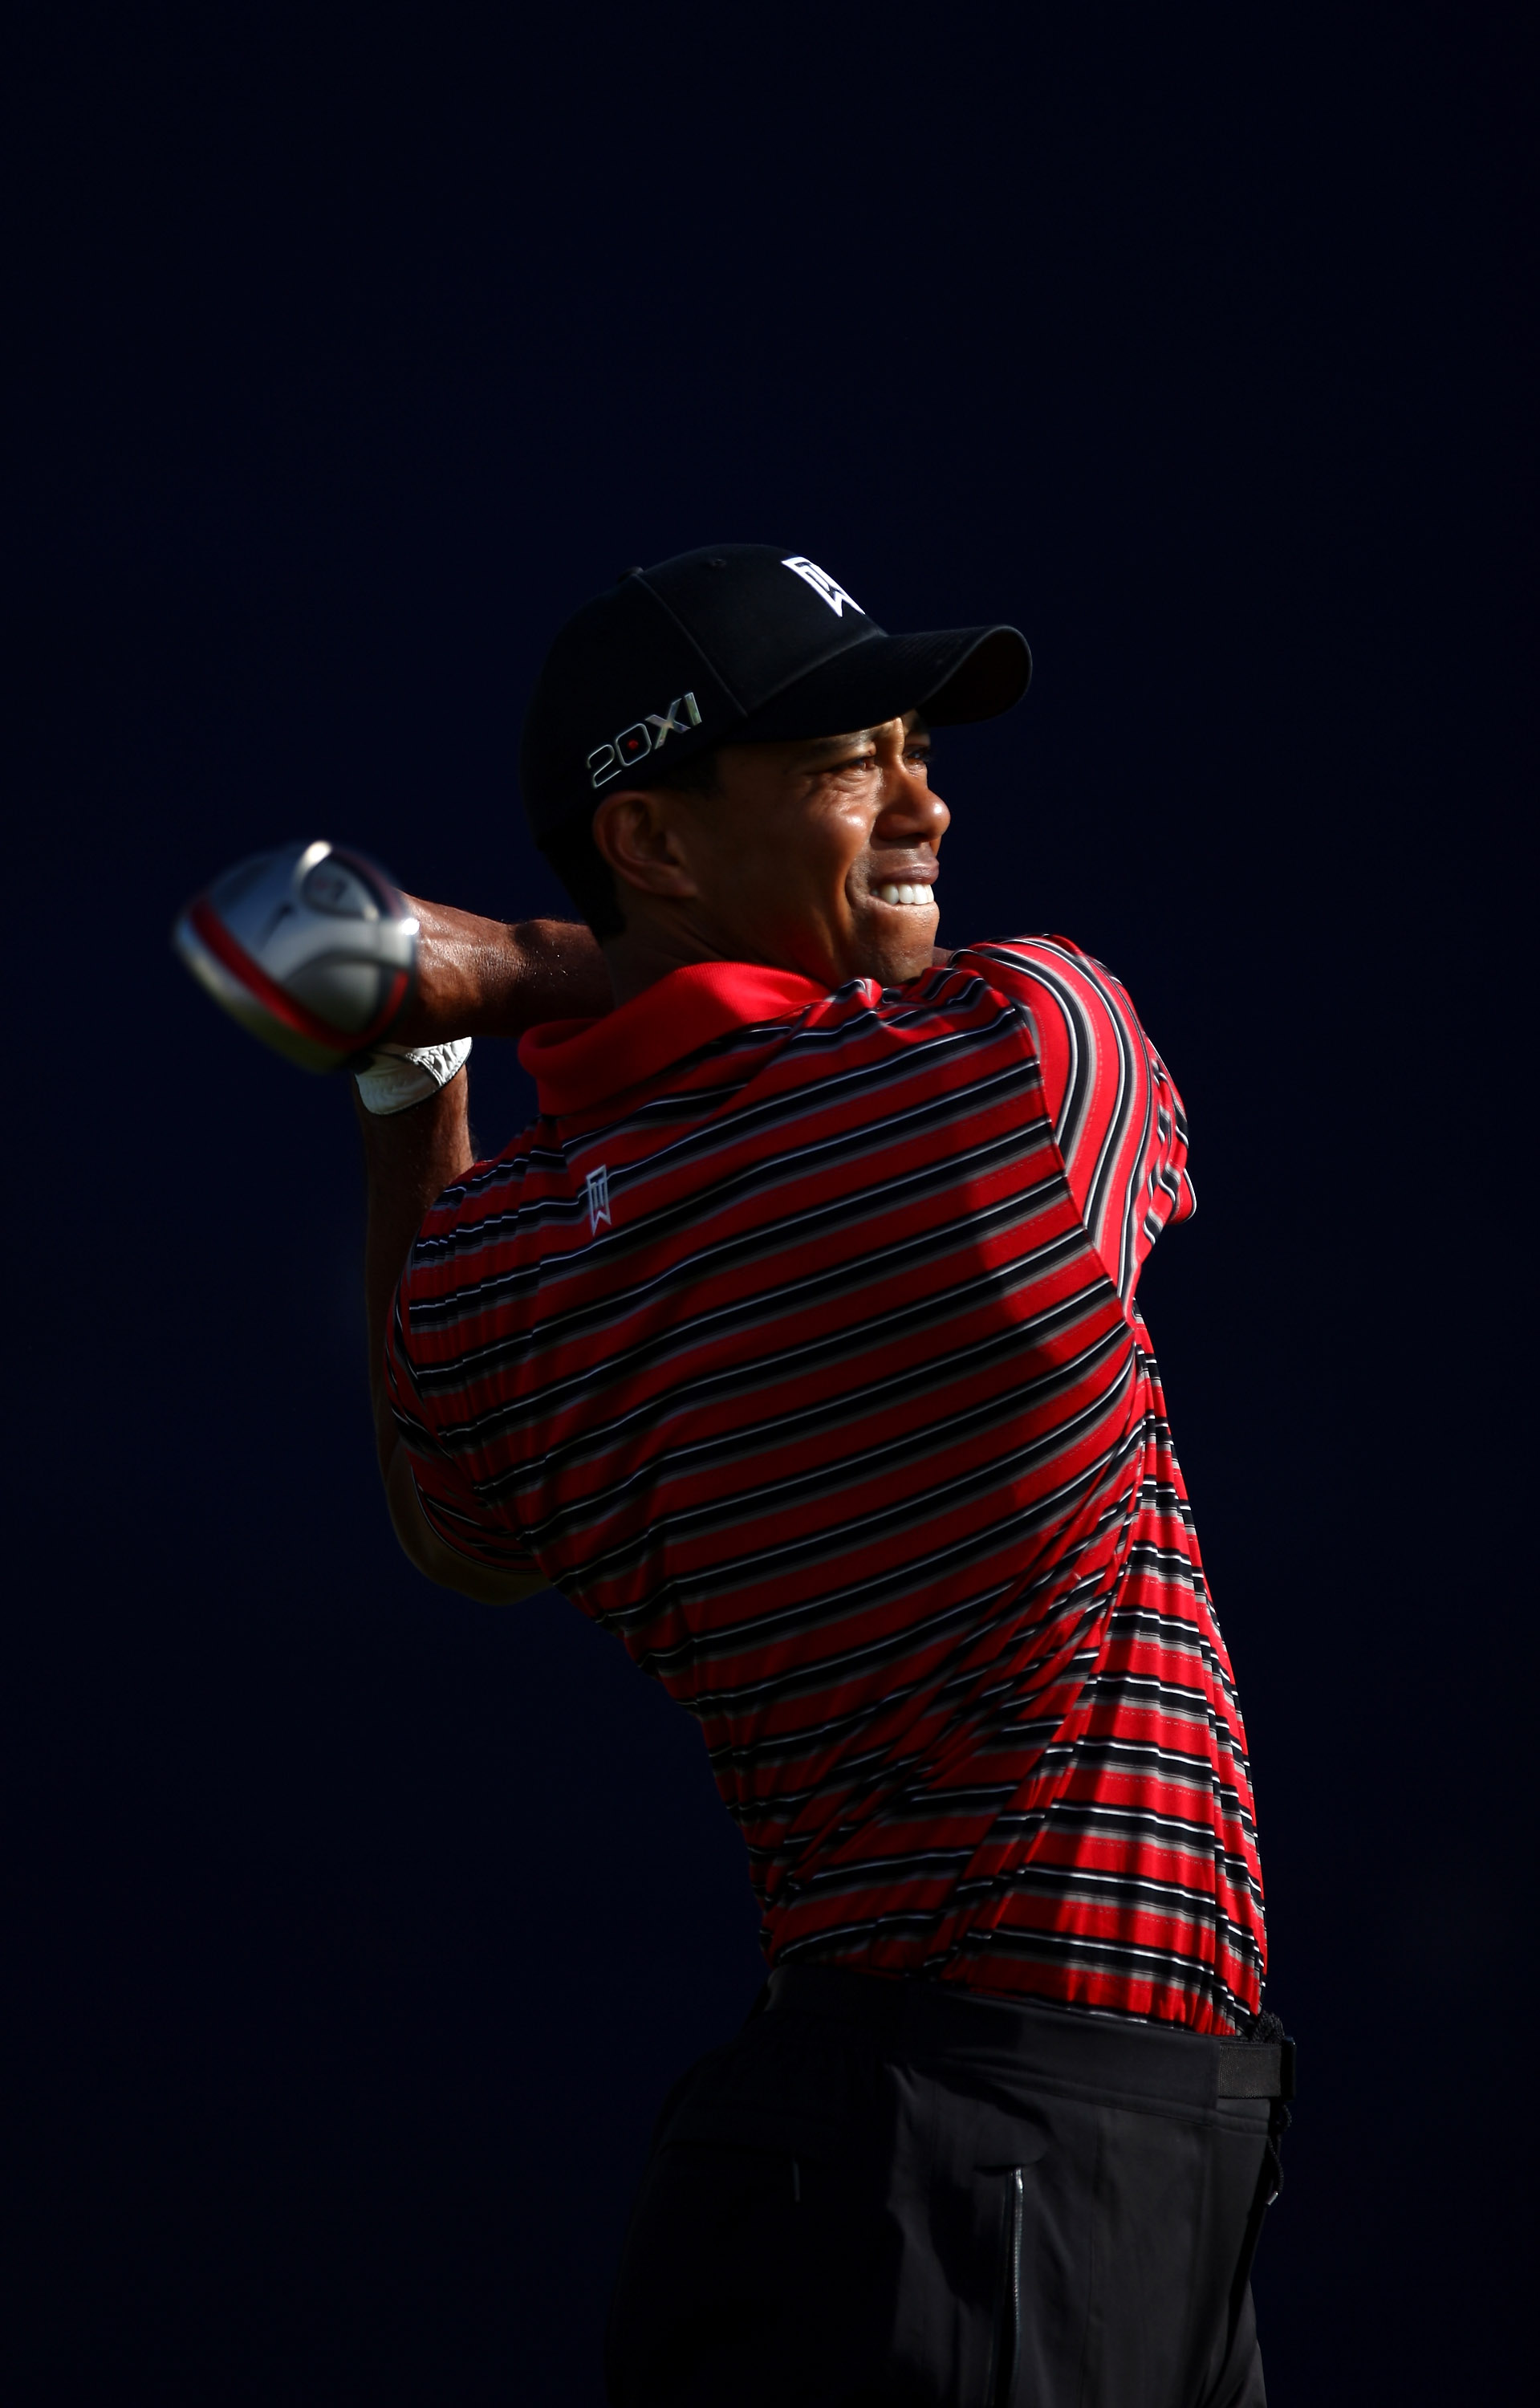 LA JOLLA, CA - JANUARY 30:  Tiger Woods tees off the 7th hole during the final round of the Farmers Insurance Open at the Torrey Pines South Course on January 30, 2011 in La Jolla, California.  (Photo by Donald Miralle/Getty Images)